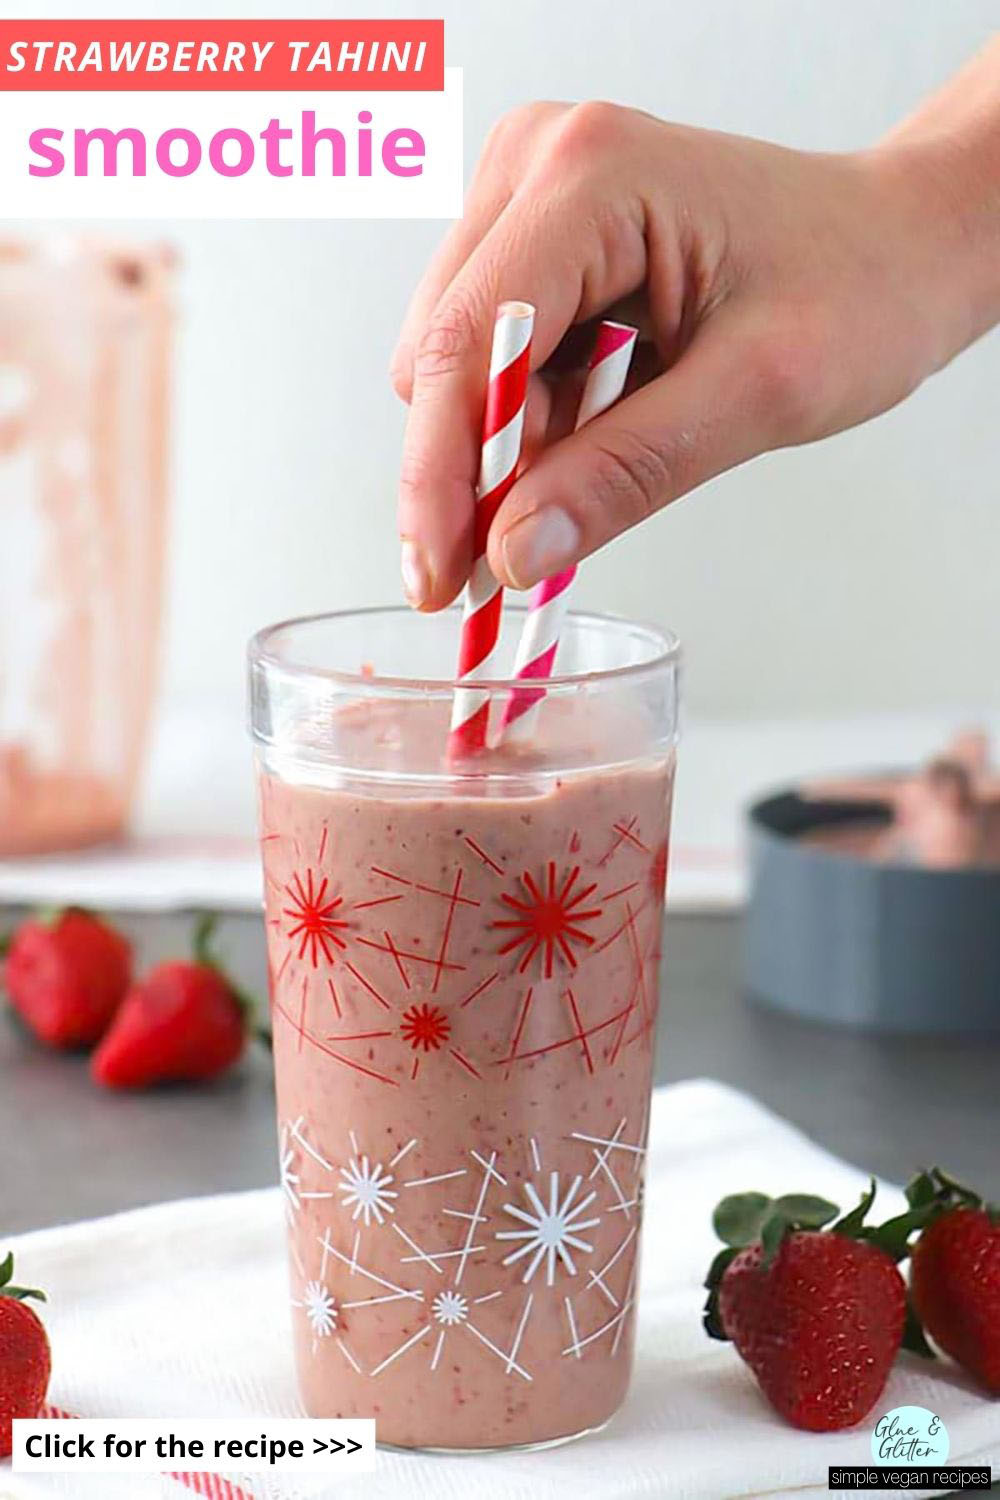 strawberry tahini smoothie in a glass with pink and red straws, strawberries and the blender in the background, text overlay